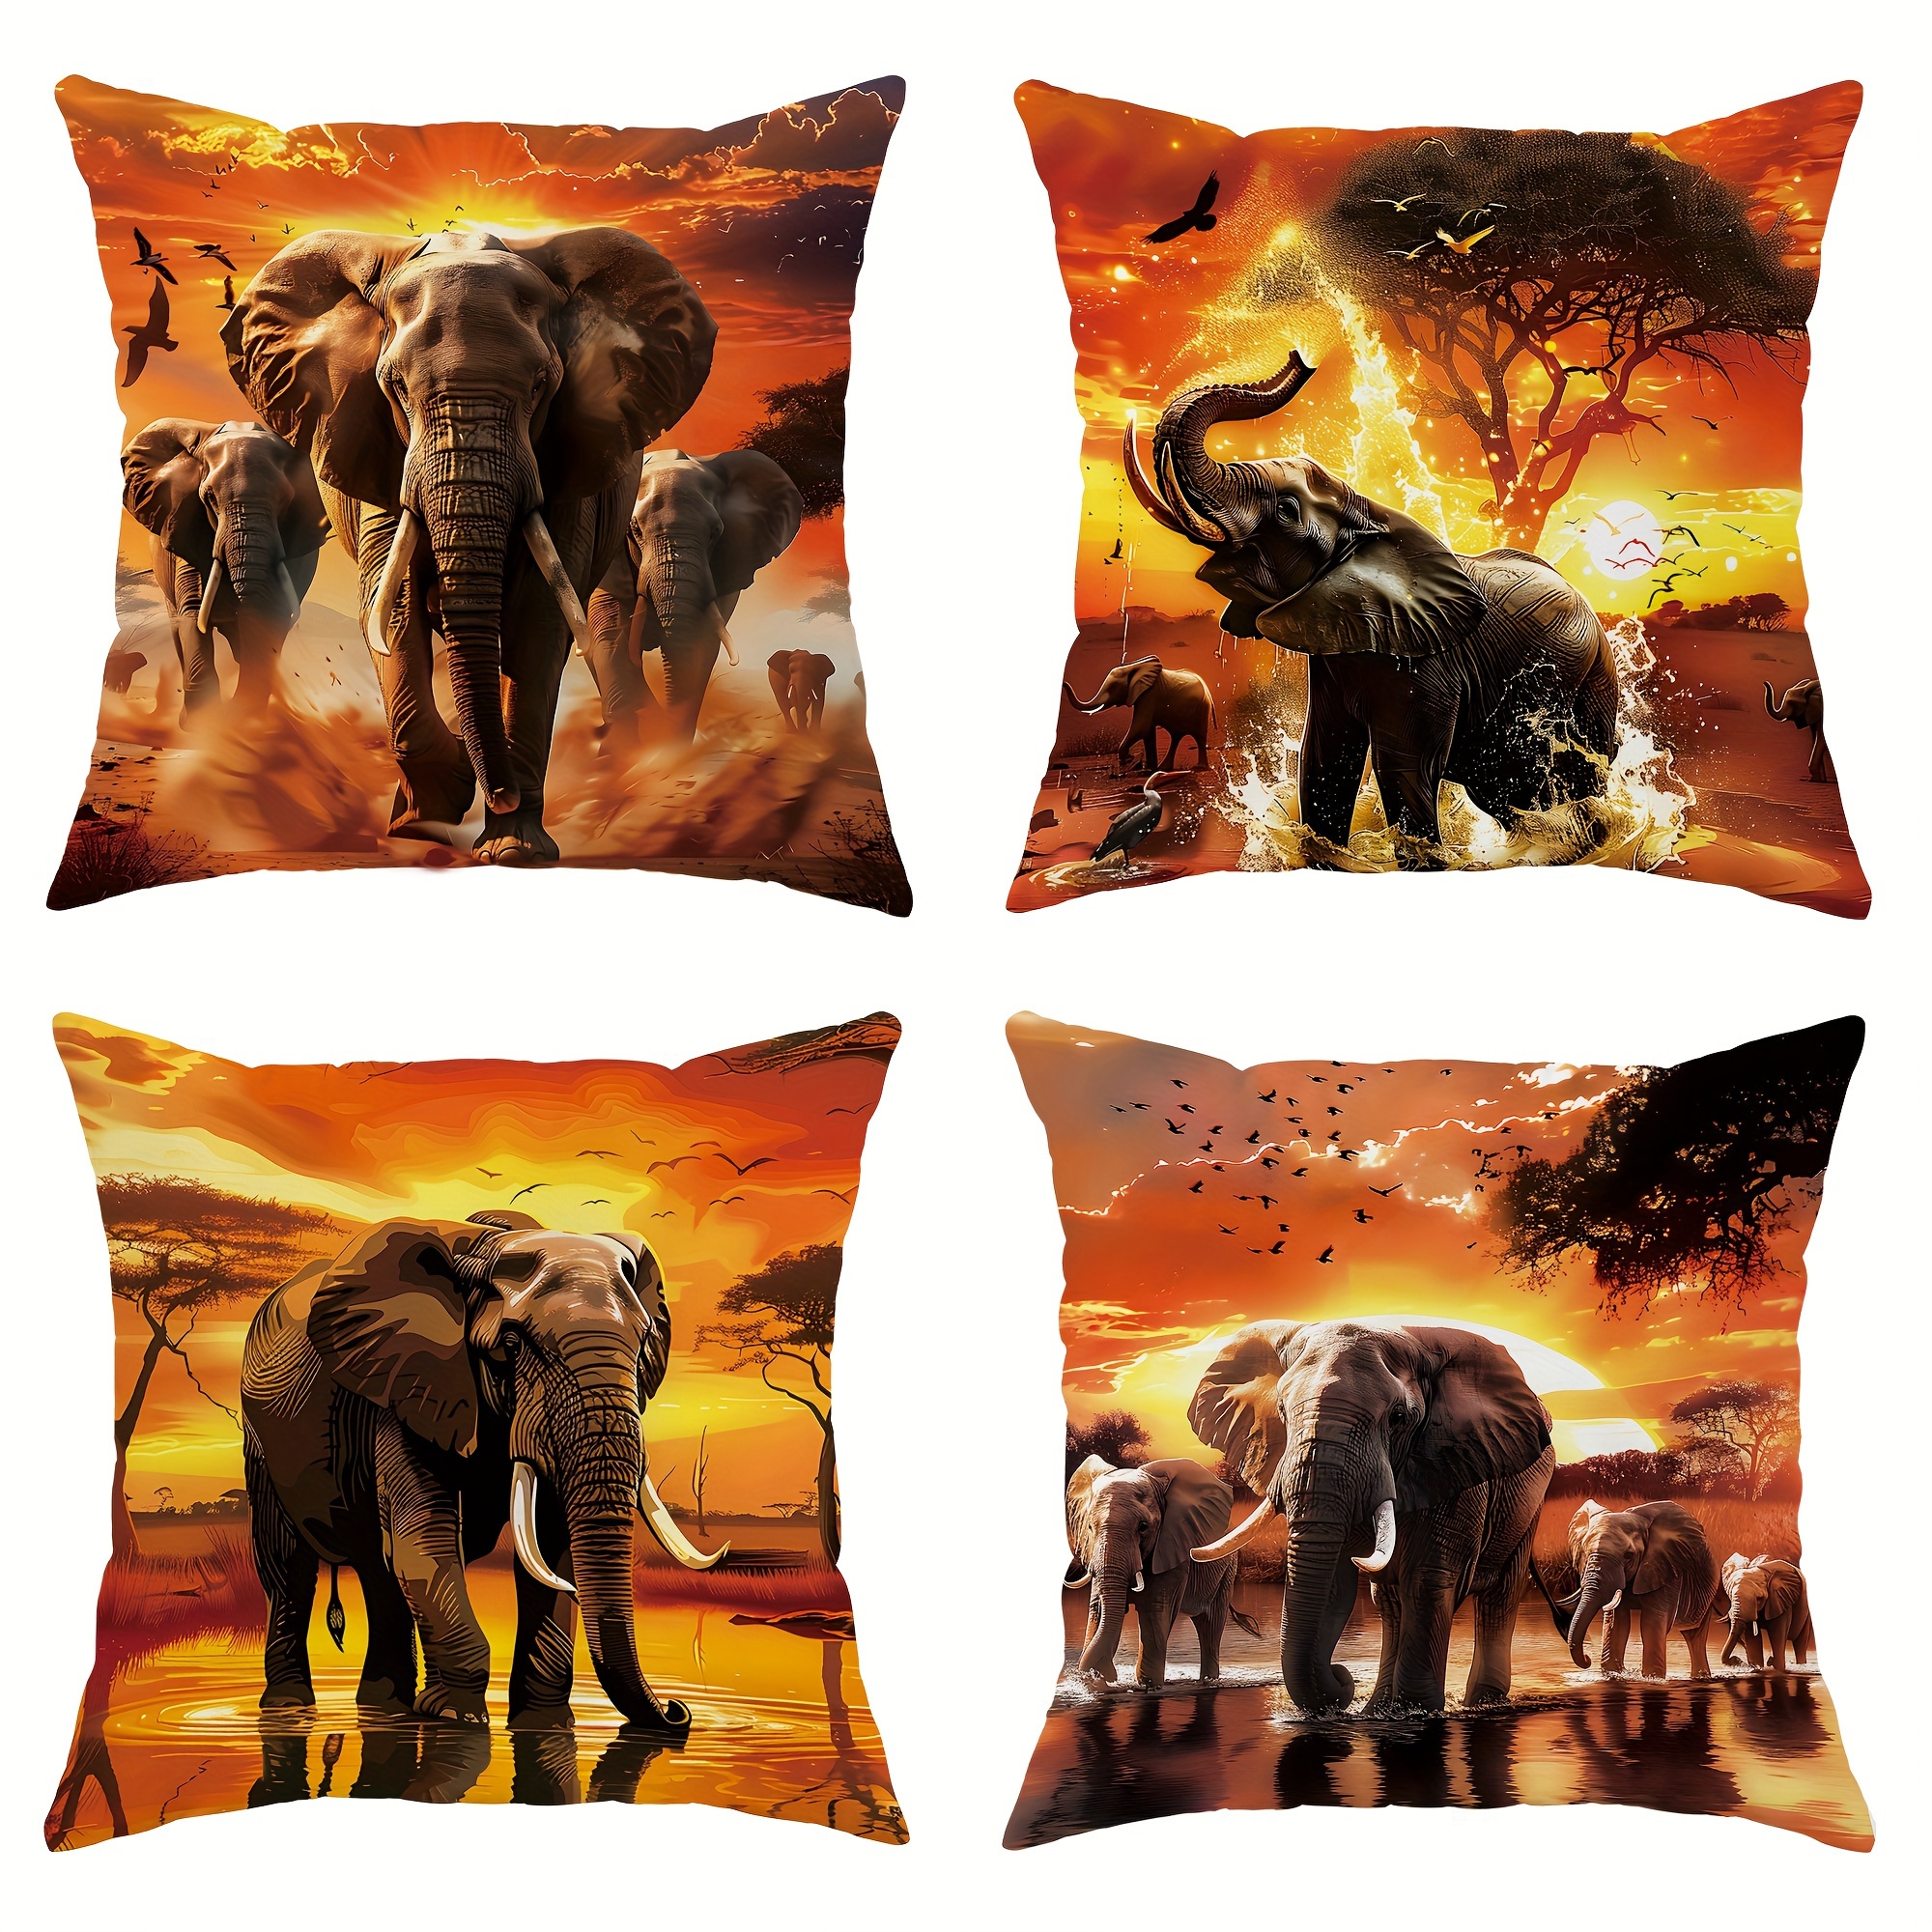 

4 Pieces Velvet Throw Pillow Covers - African Elephant Sunset Tree Orange Design - 18x18 Inch - Suitable For Living Room, Bedroom, Sofa, And Bed Decoration